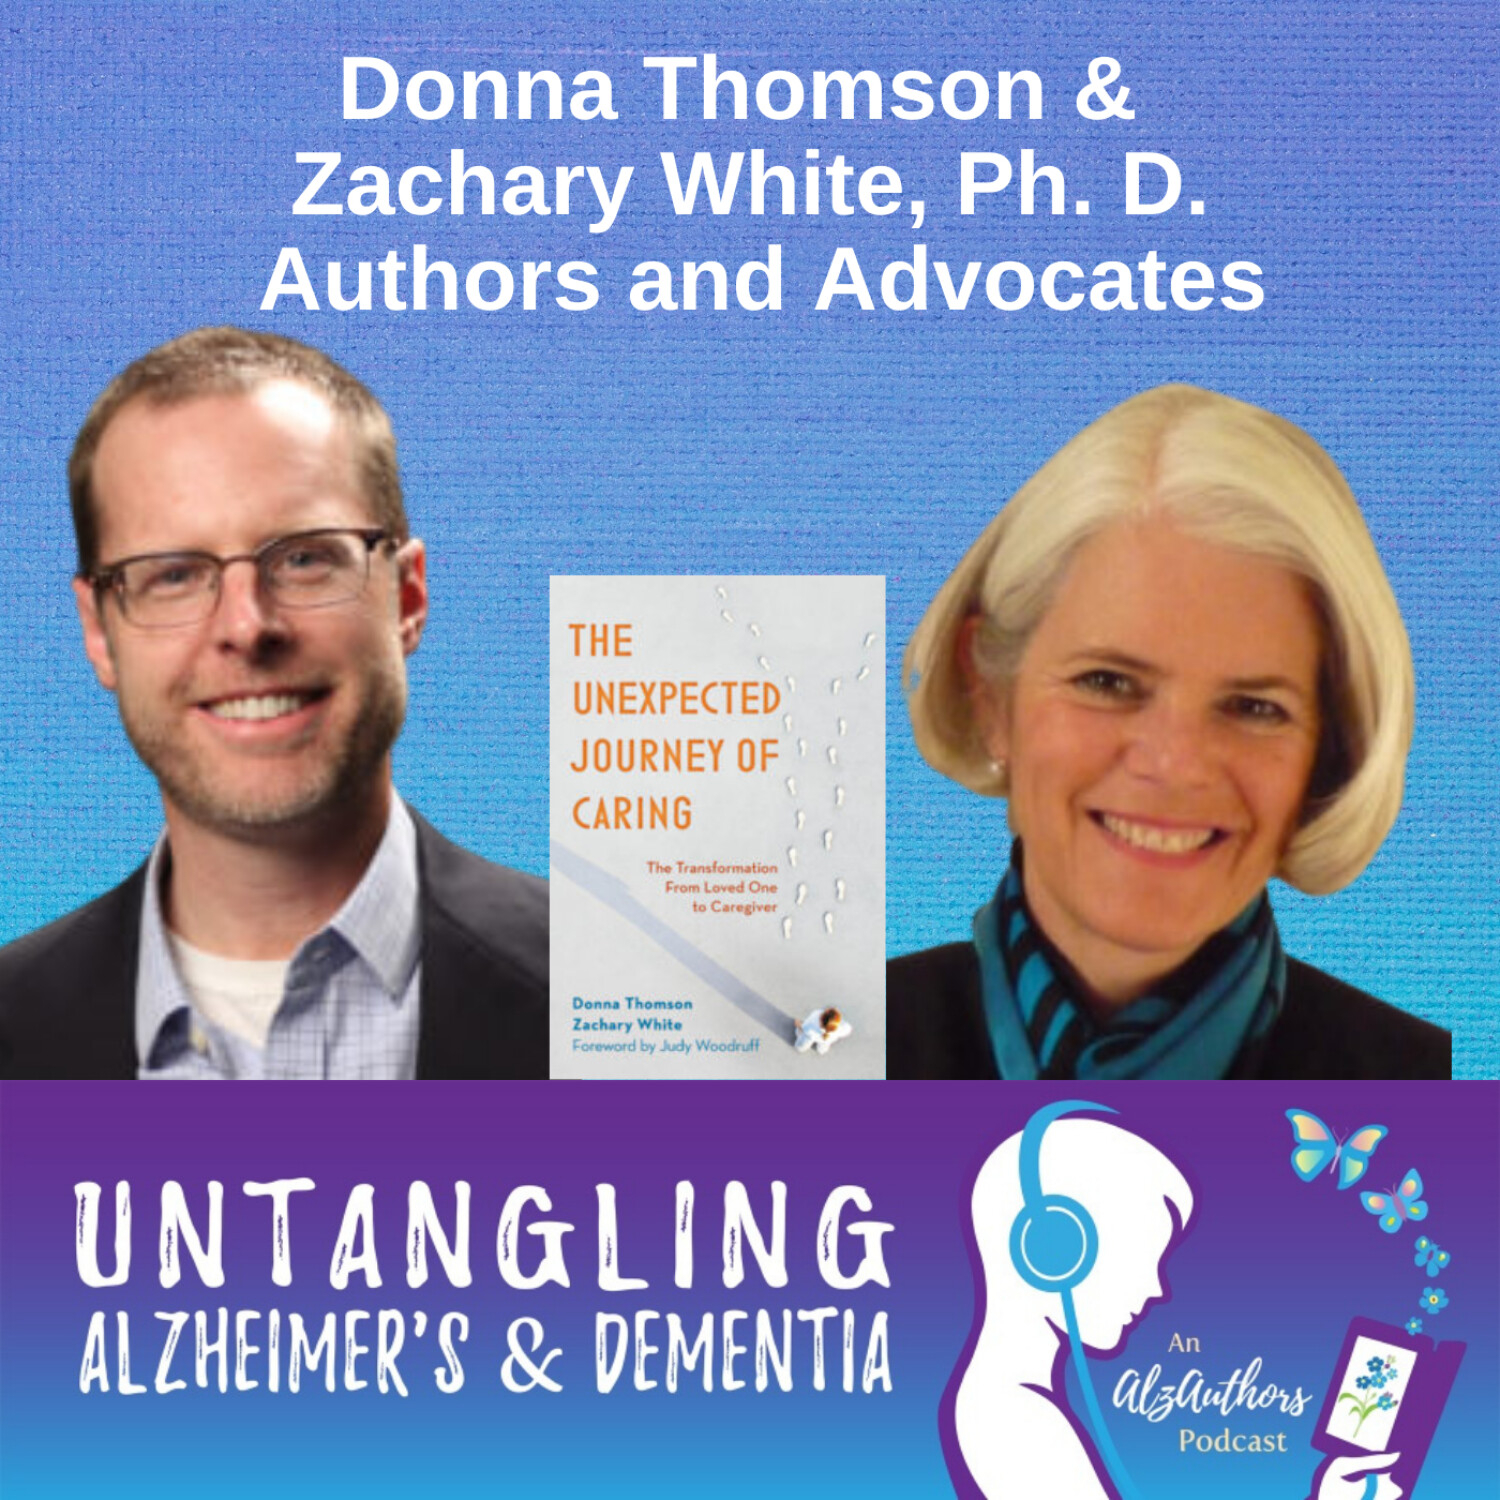 Donna Thomson and Zachary White, Ph.D Untangle The Unexpected Journey of Caring